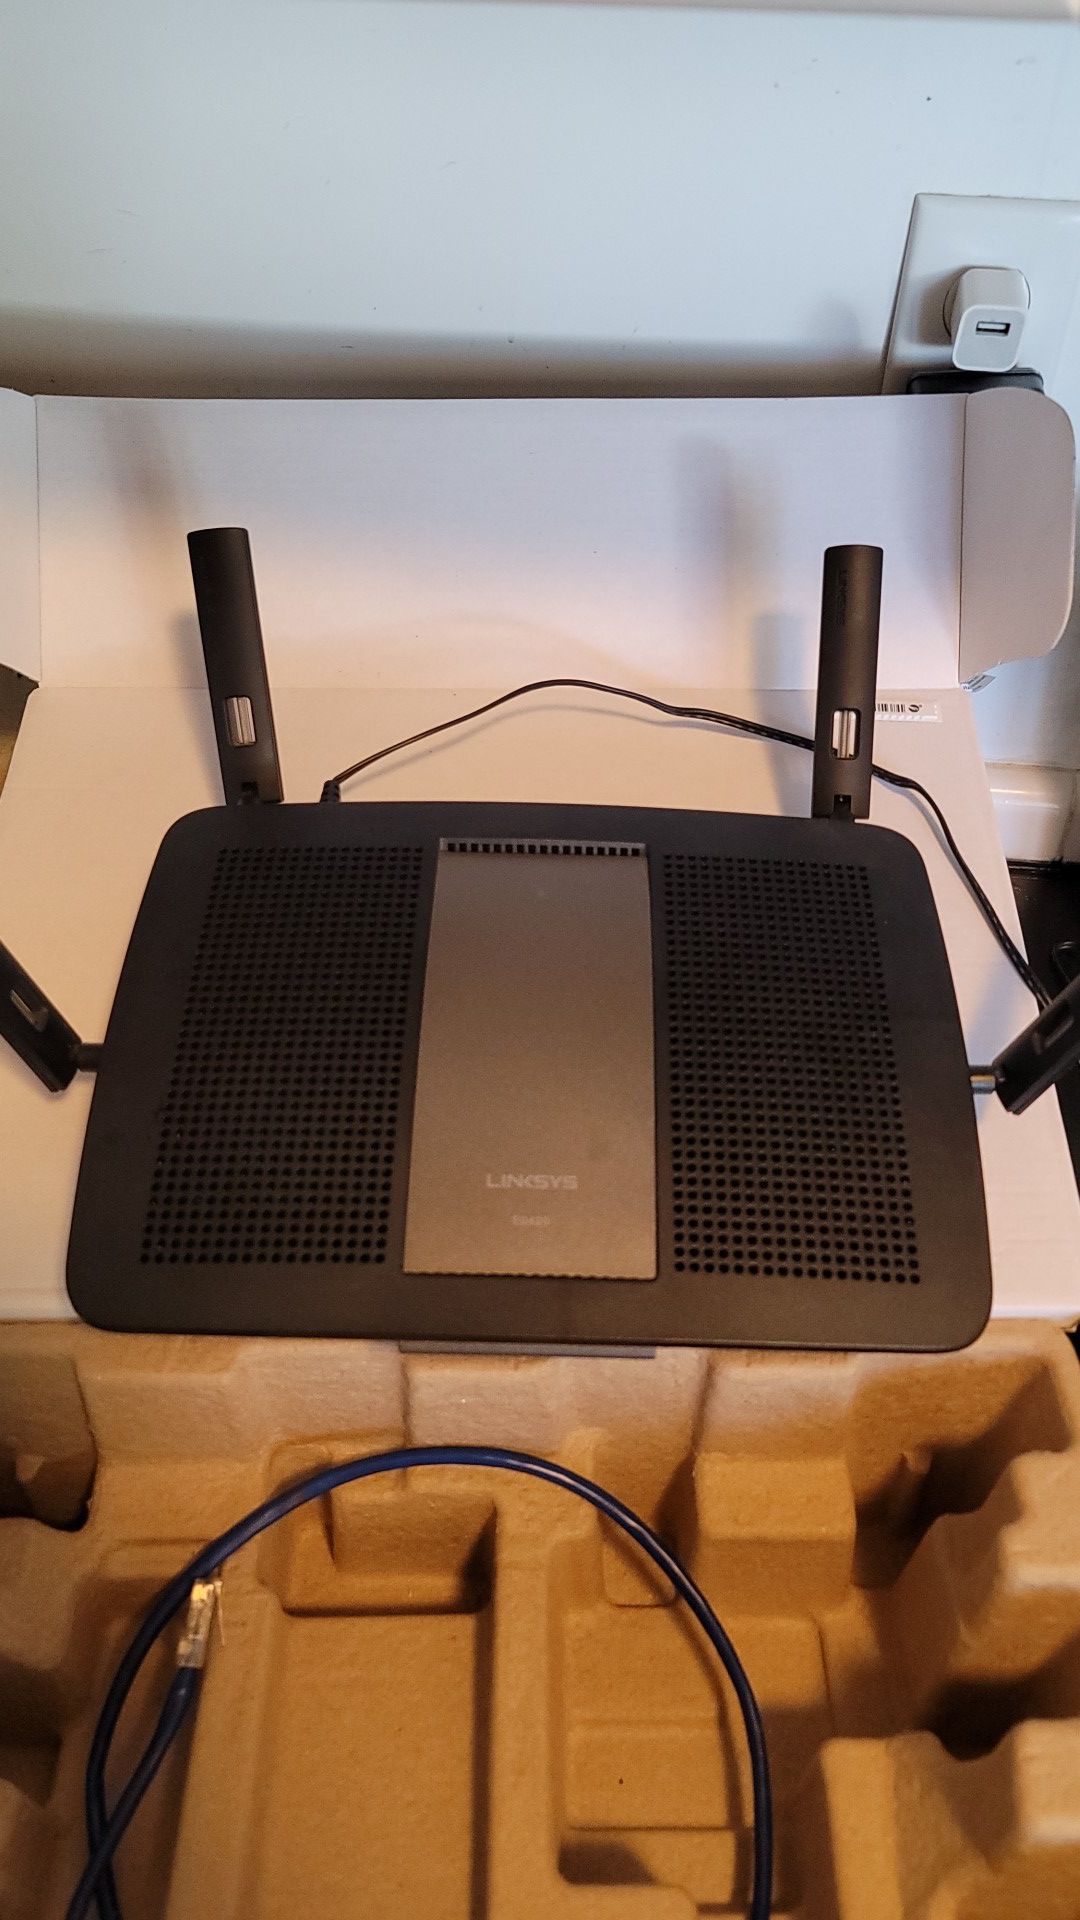 Linksys Router EB 400